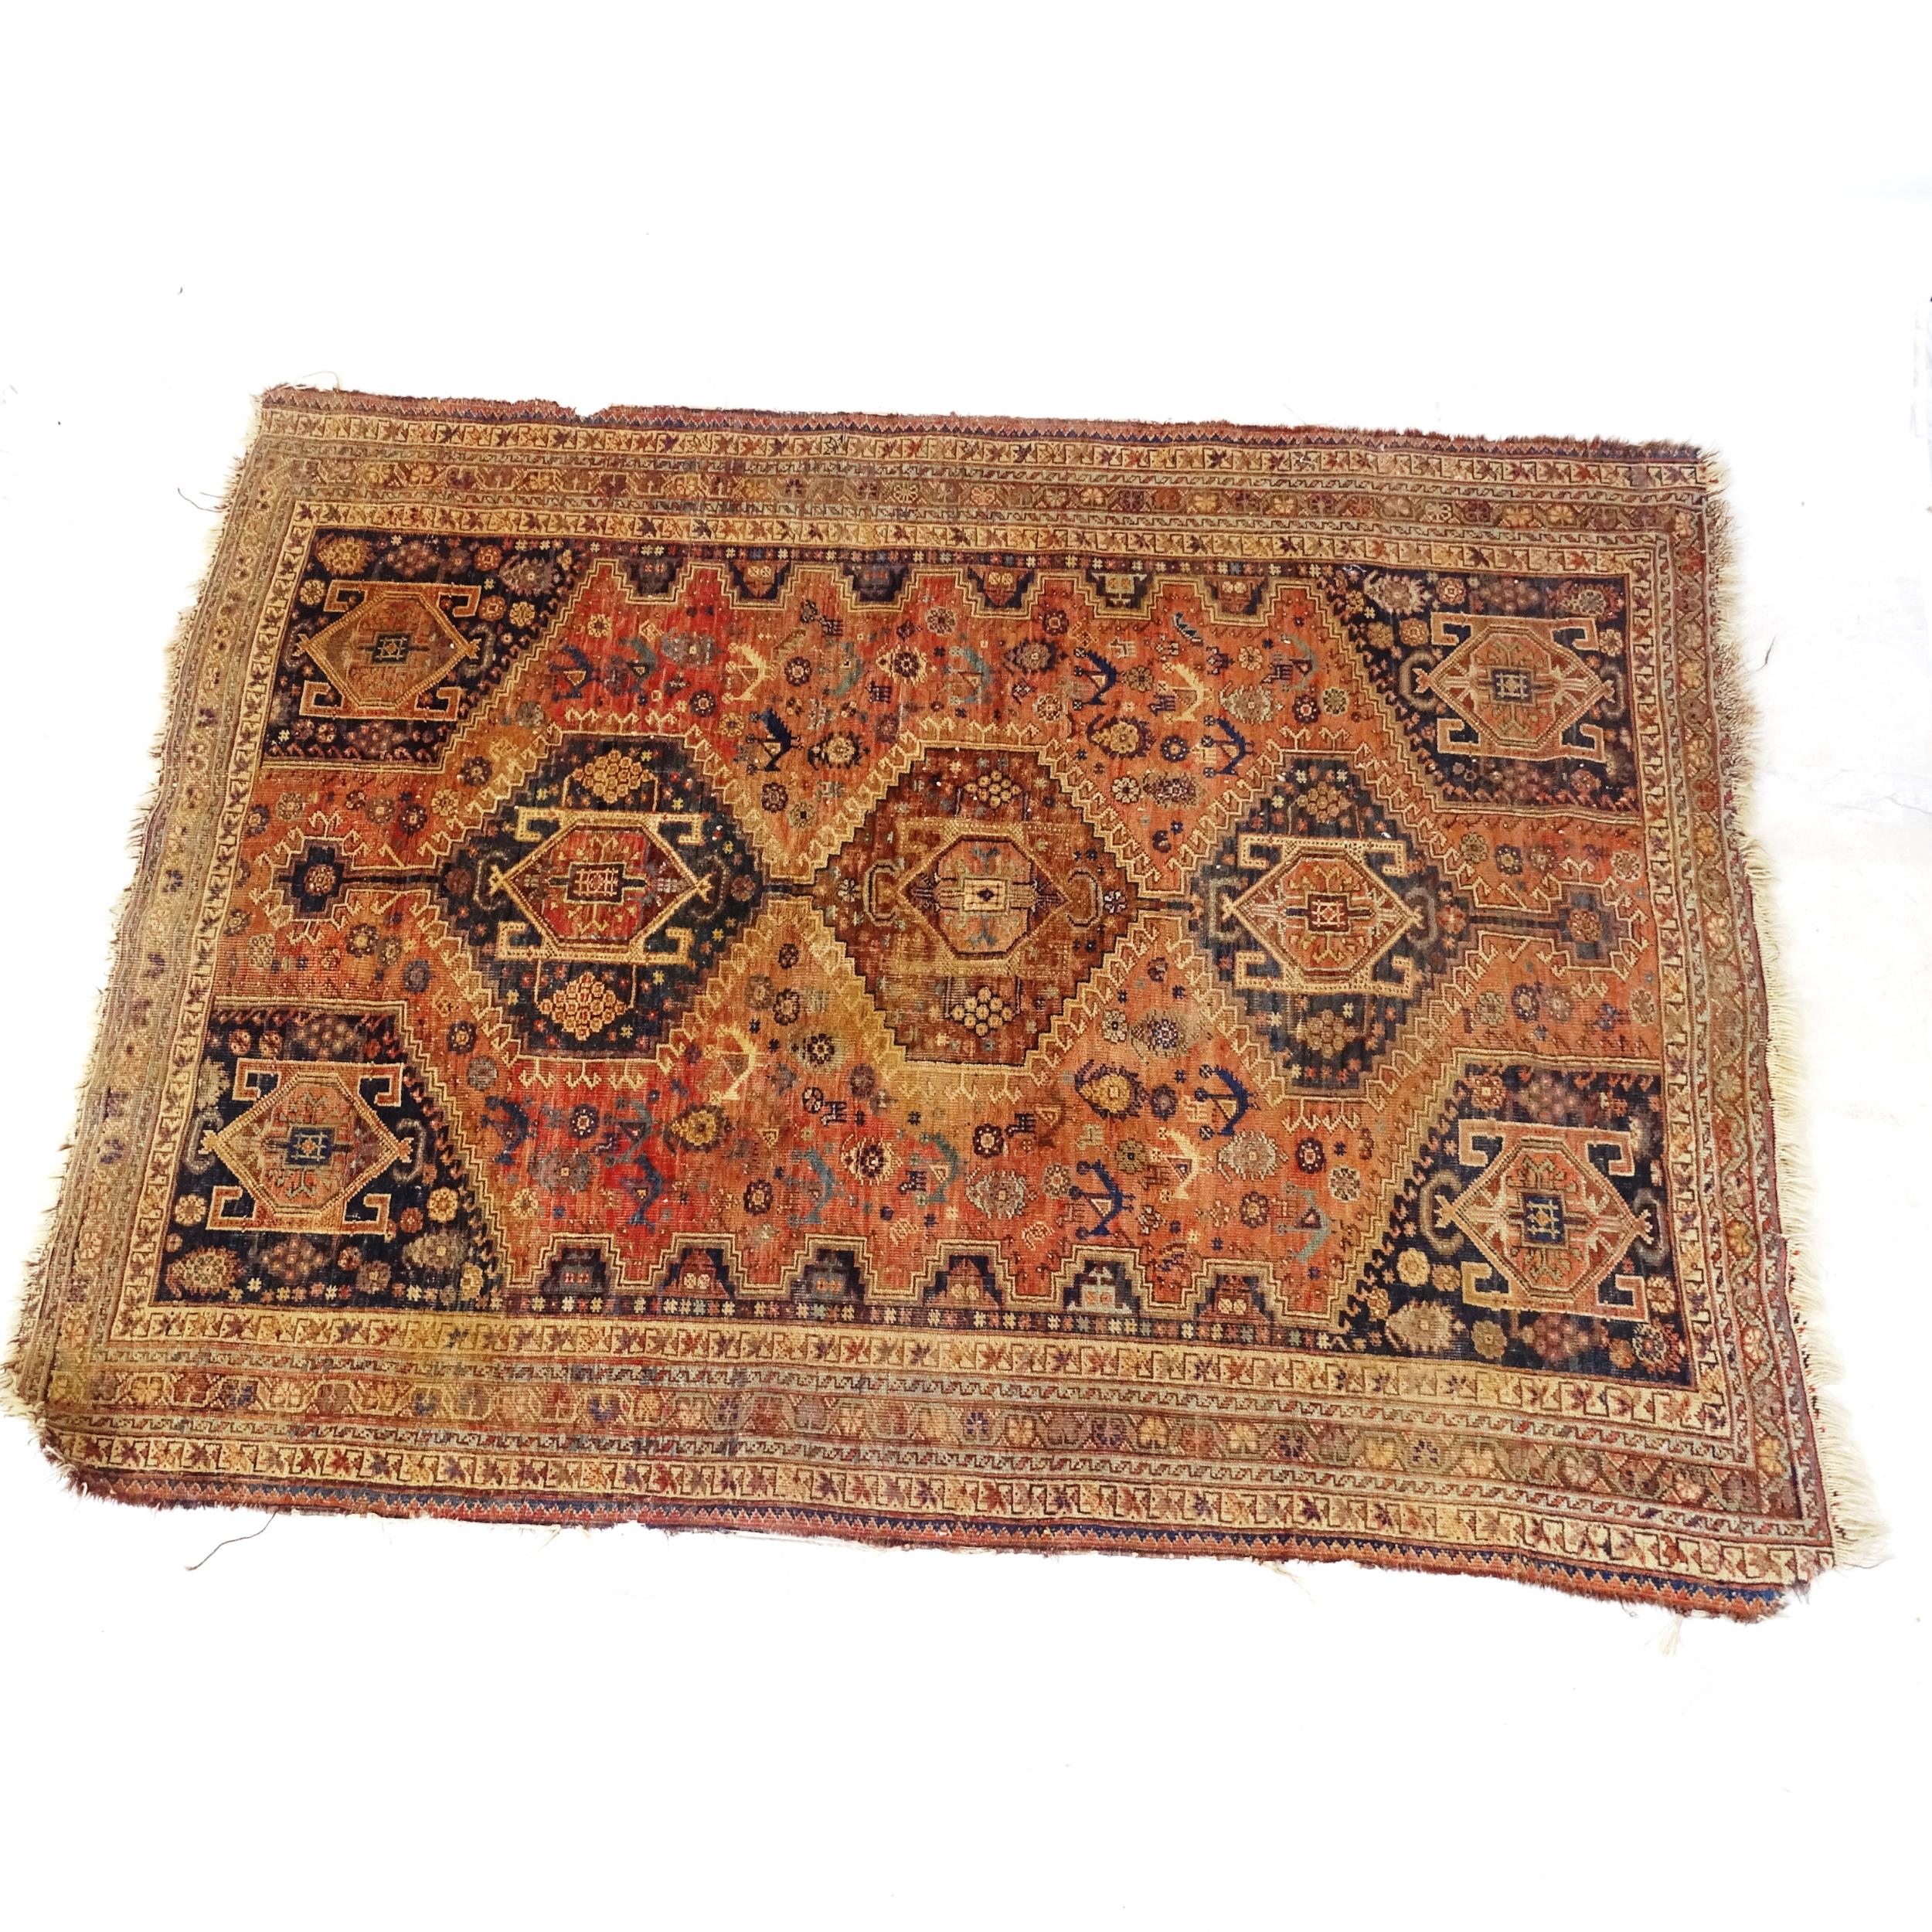 An Antique red ground Persian rug, with 5 symmetrical panel border and lozenge, 200cm x 150cm